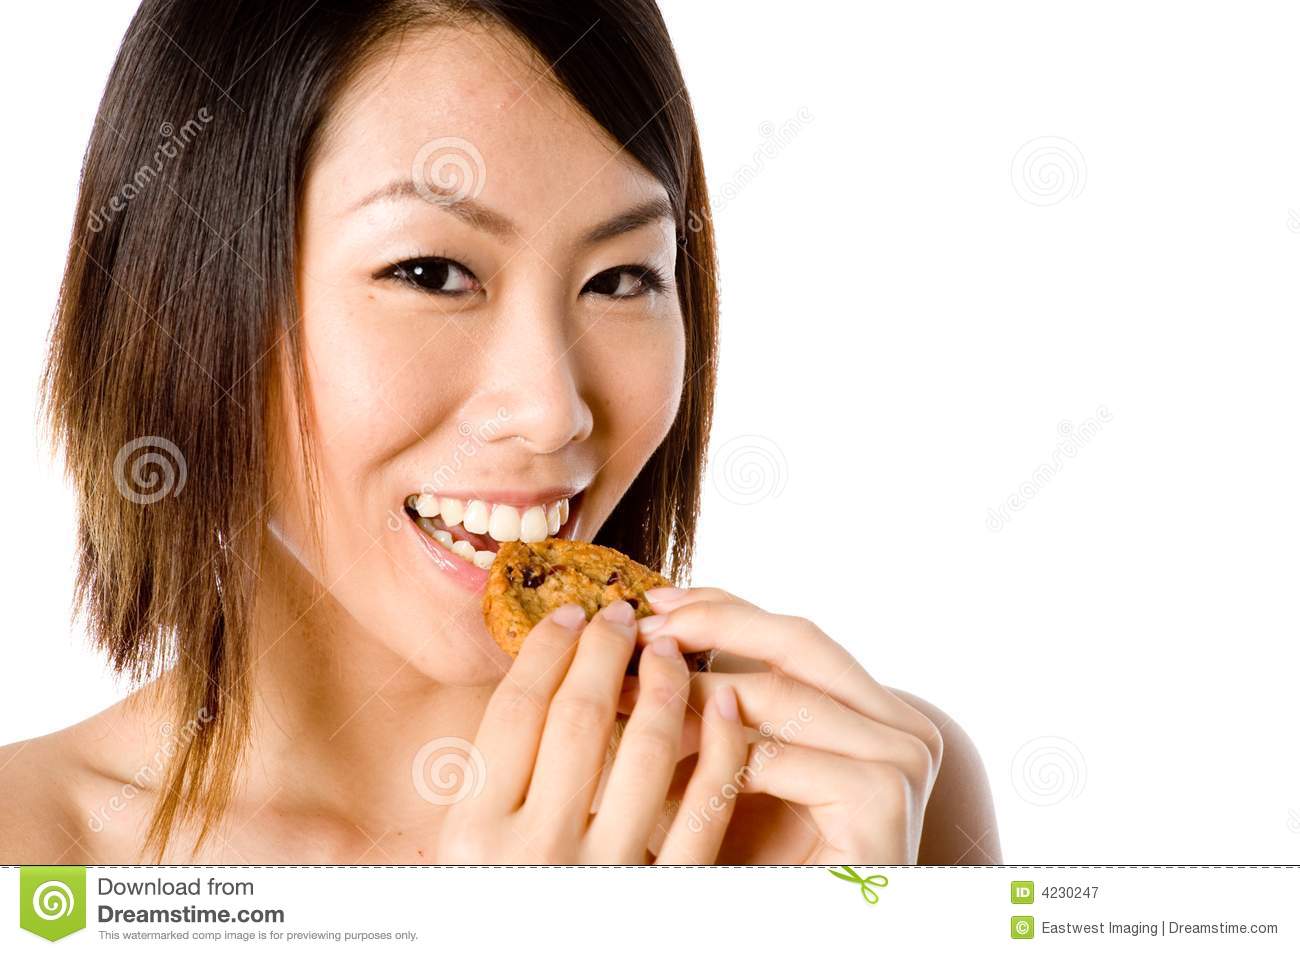 Eating Cookie Royalty Free Stock Photography   Image  4230247